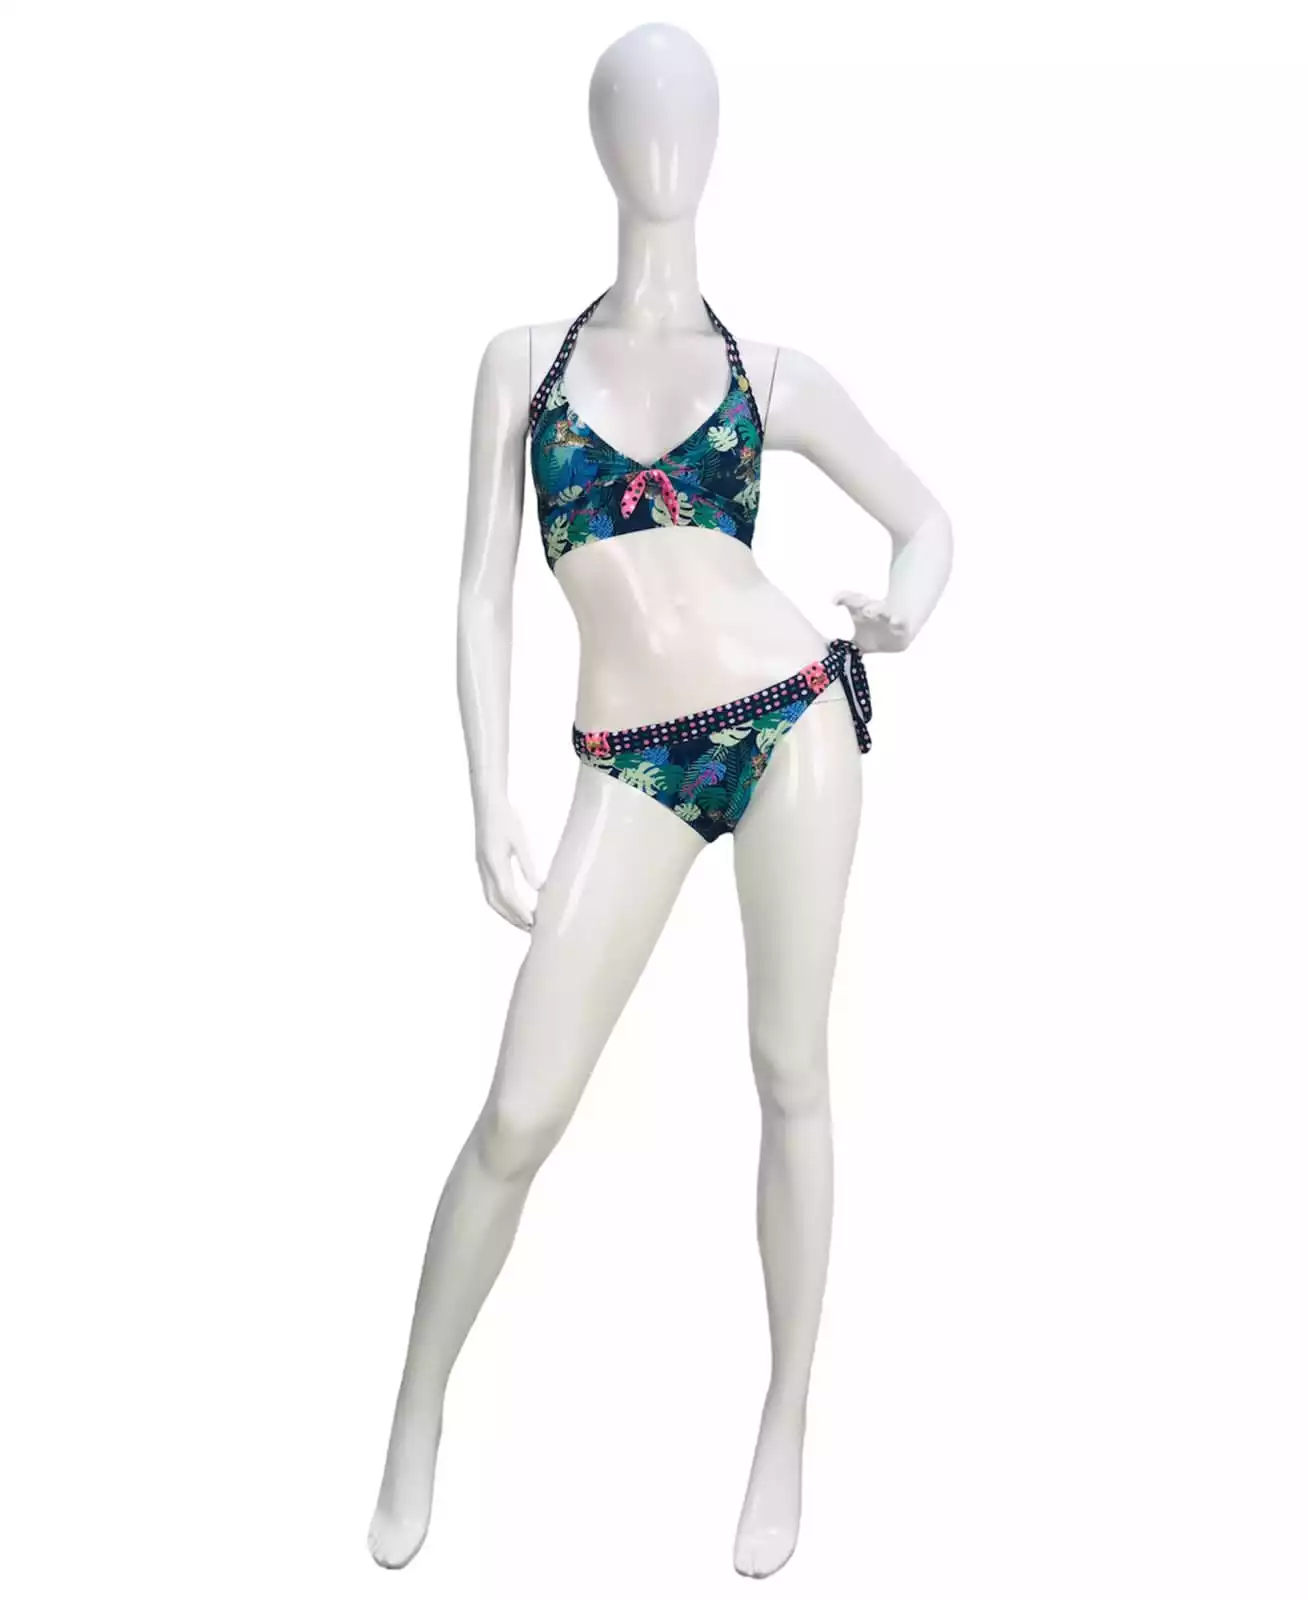 Swimwsuit by Juicy Couture